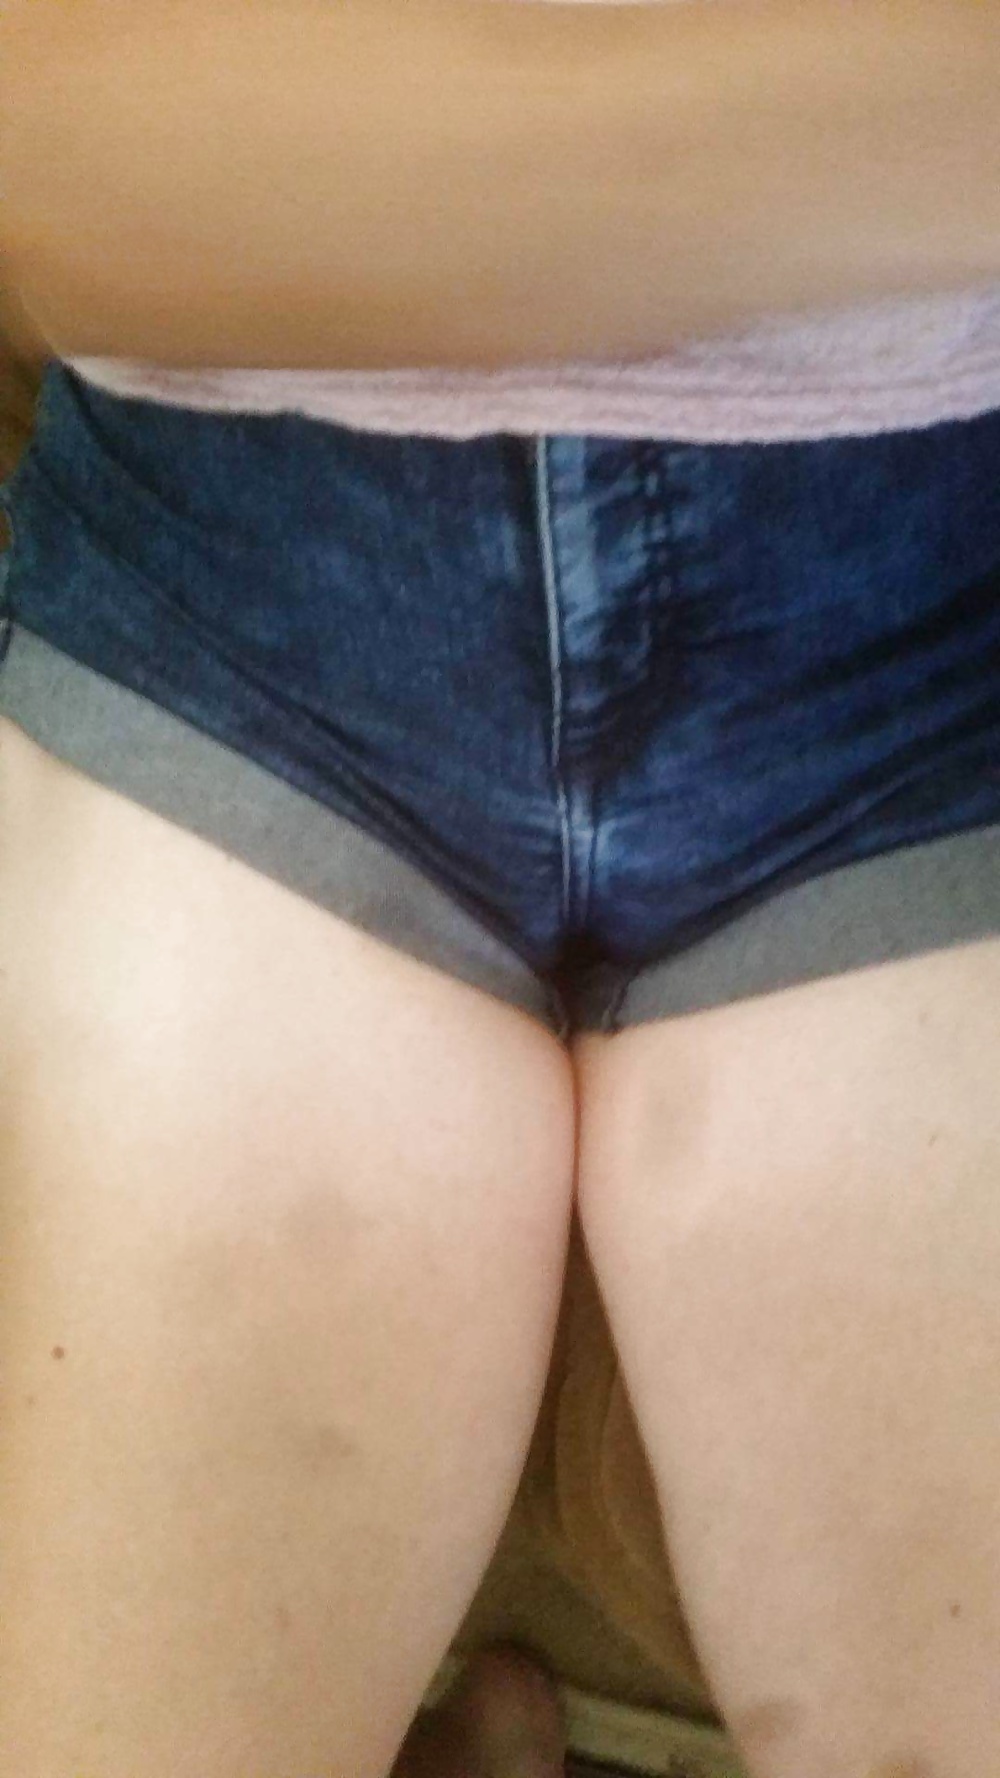 Wife in tight shorts with cameltoe (3/11)